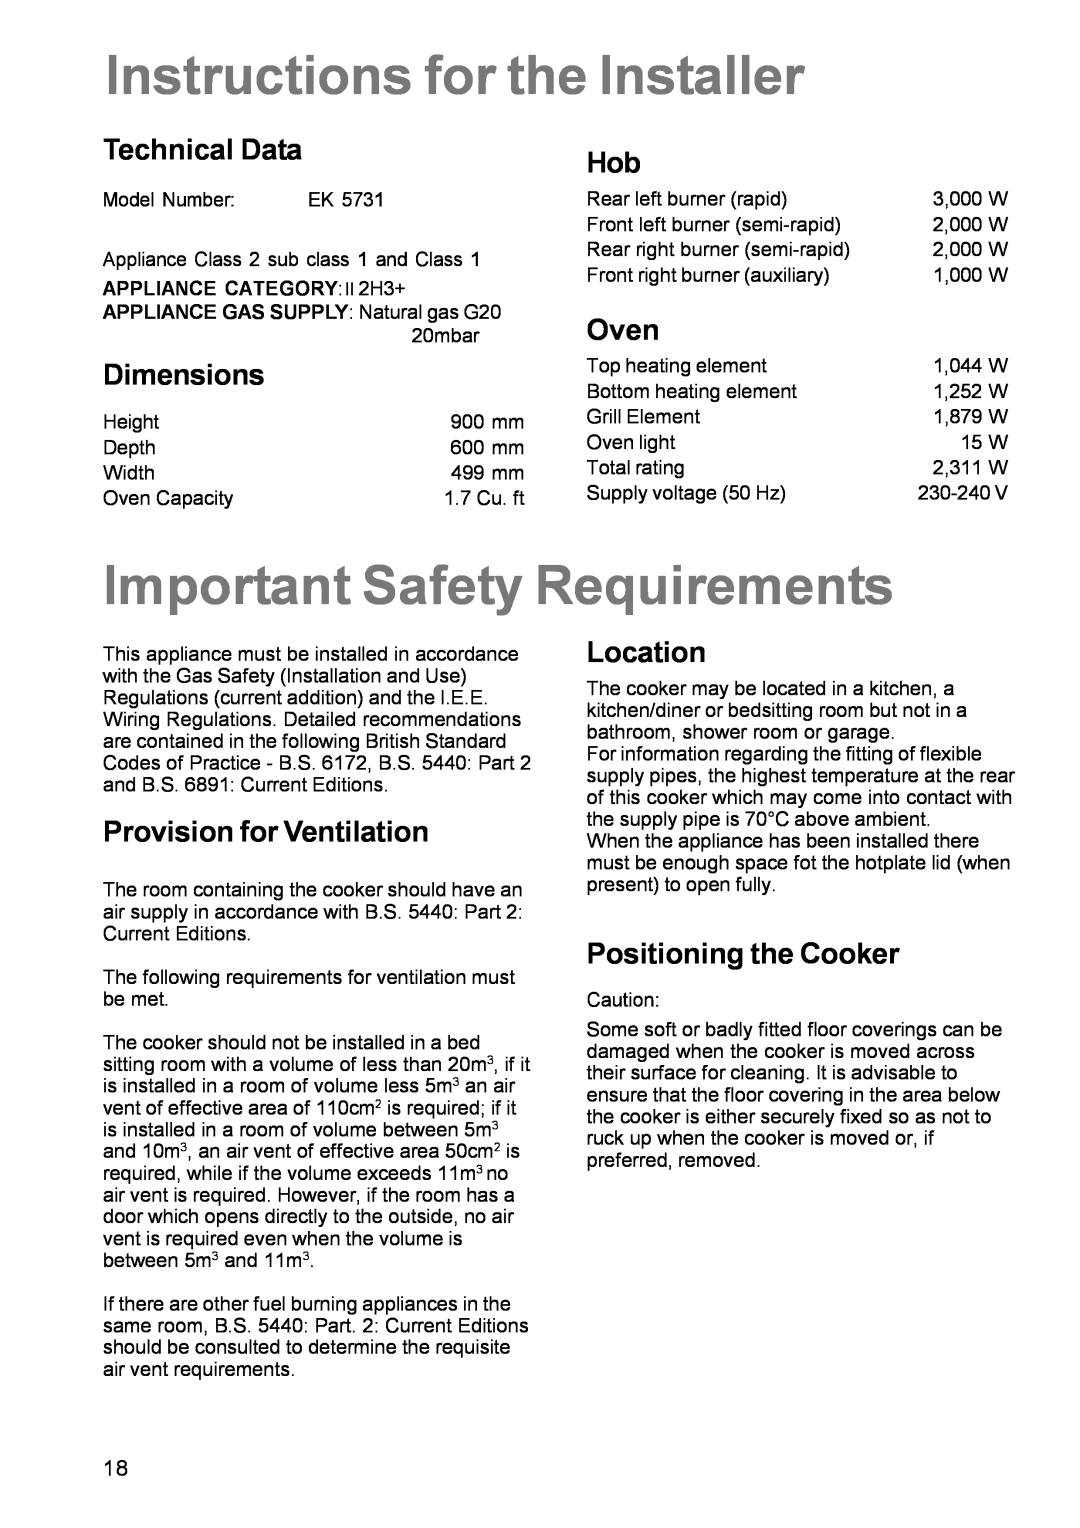 Electrolux EK 5731 manual Instructions for the Installer, Important Safety Requirements, Technical Data, Dimensions, Oven 